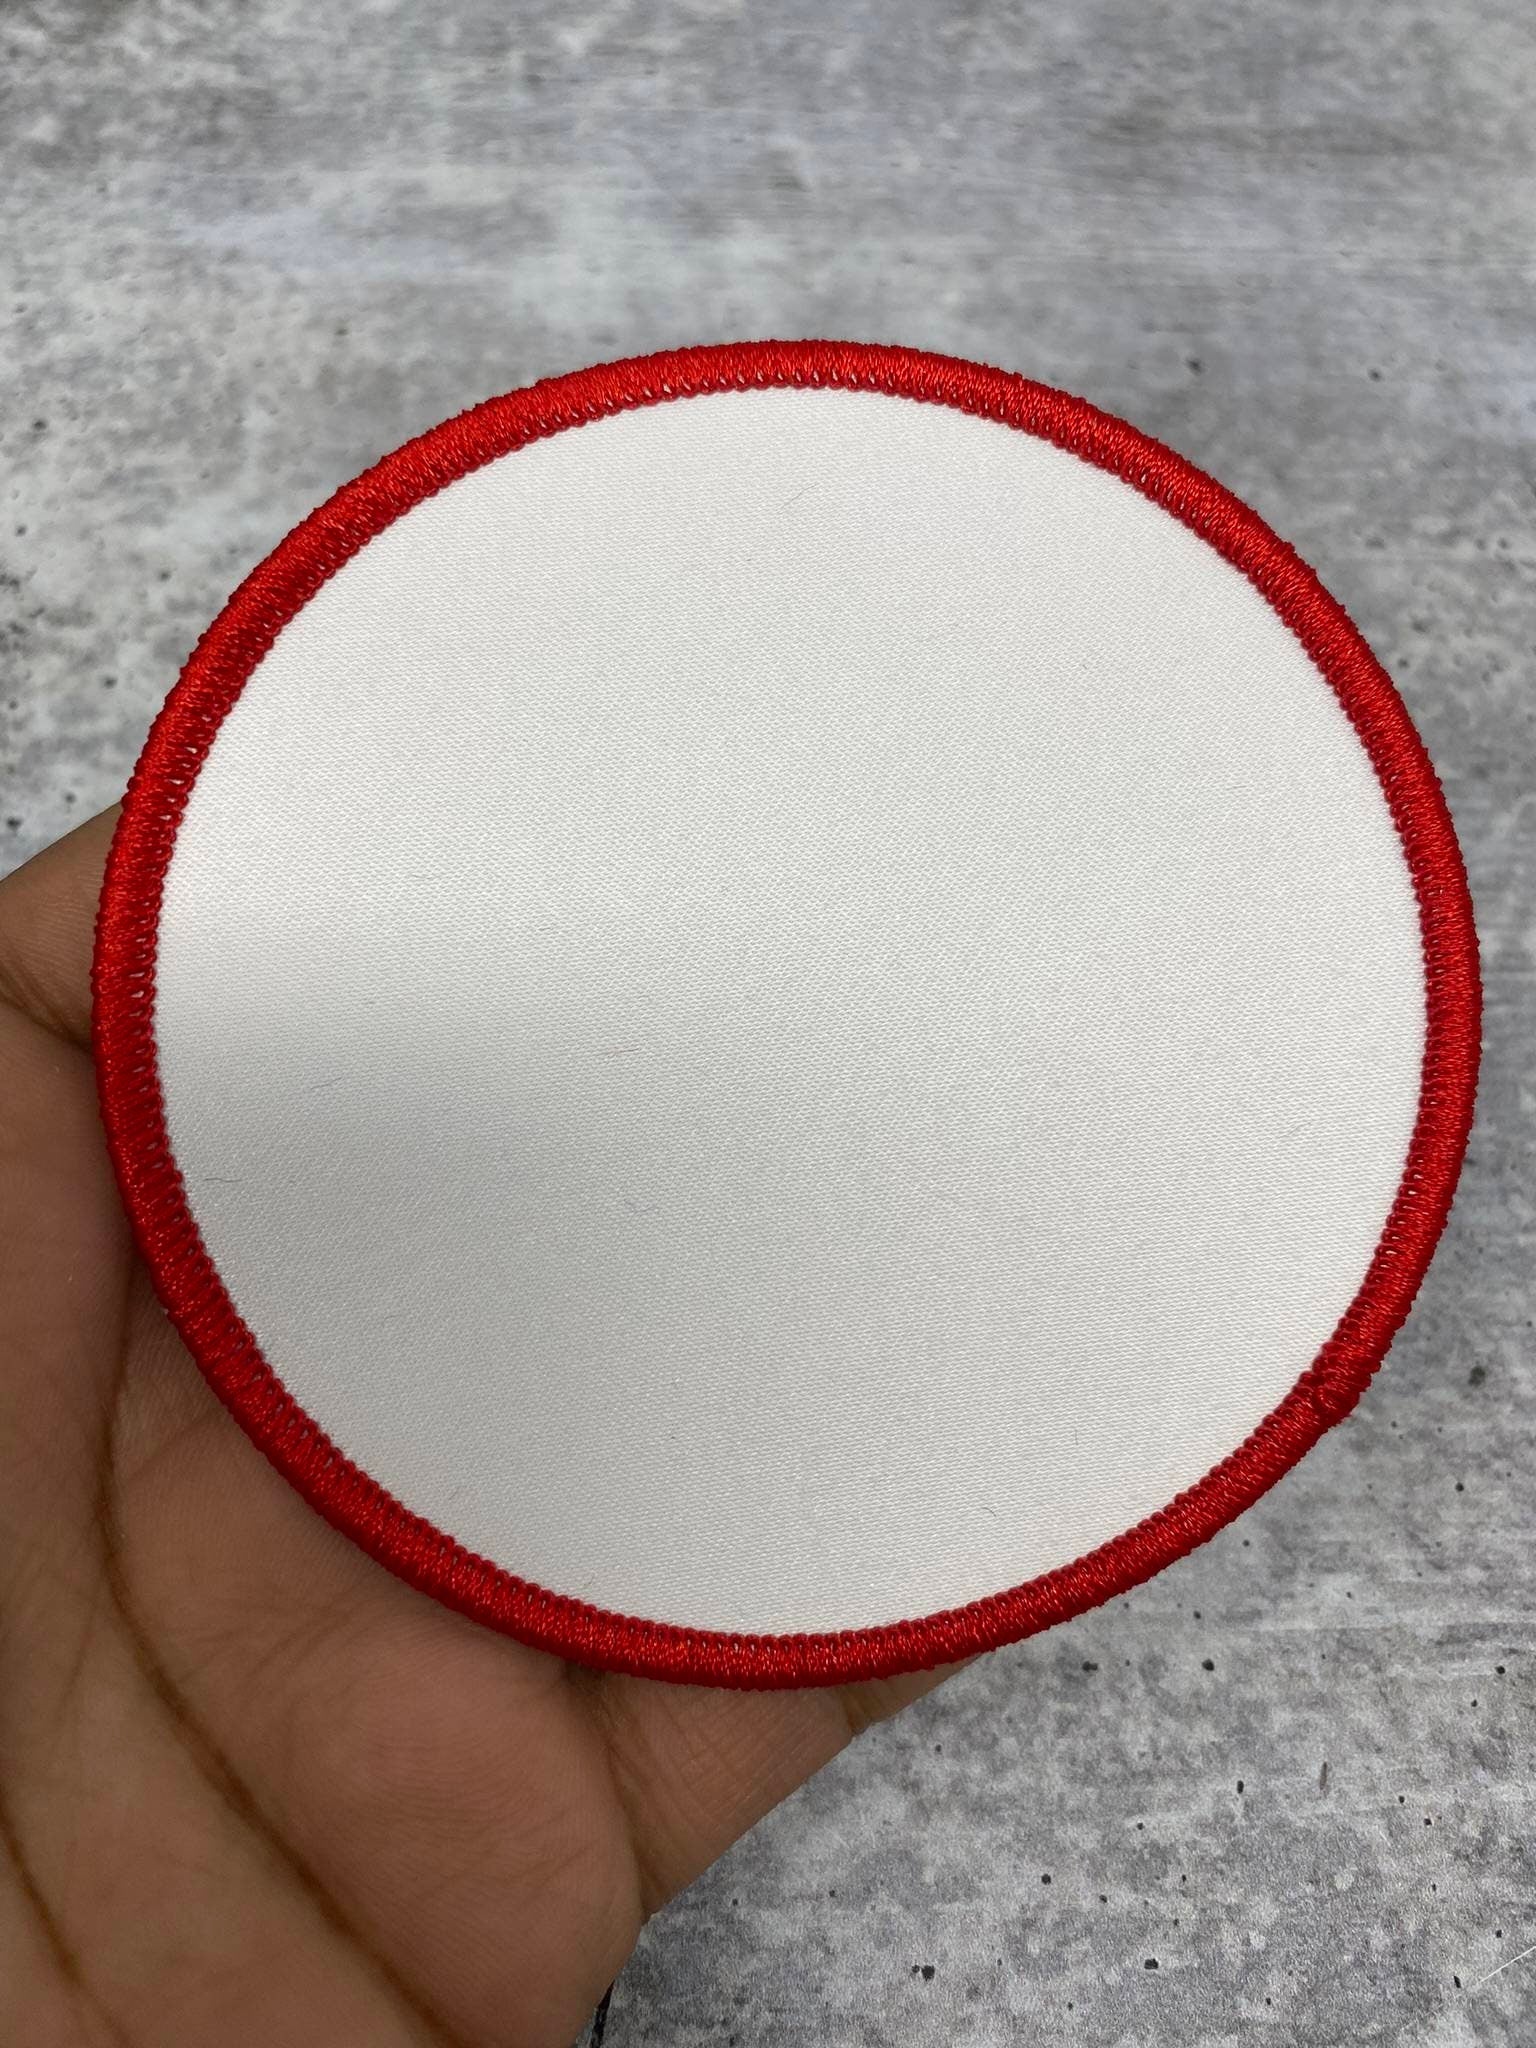 Buy Wholesale China Sublimation Hat Patches Fabric Iron-on Blank